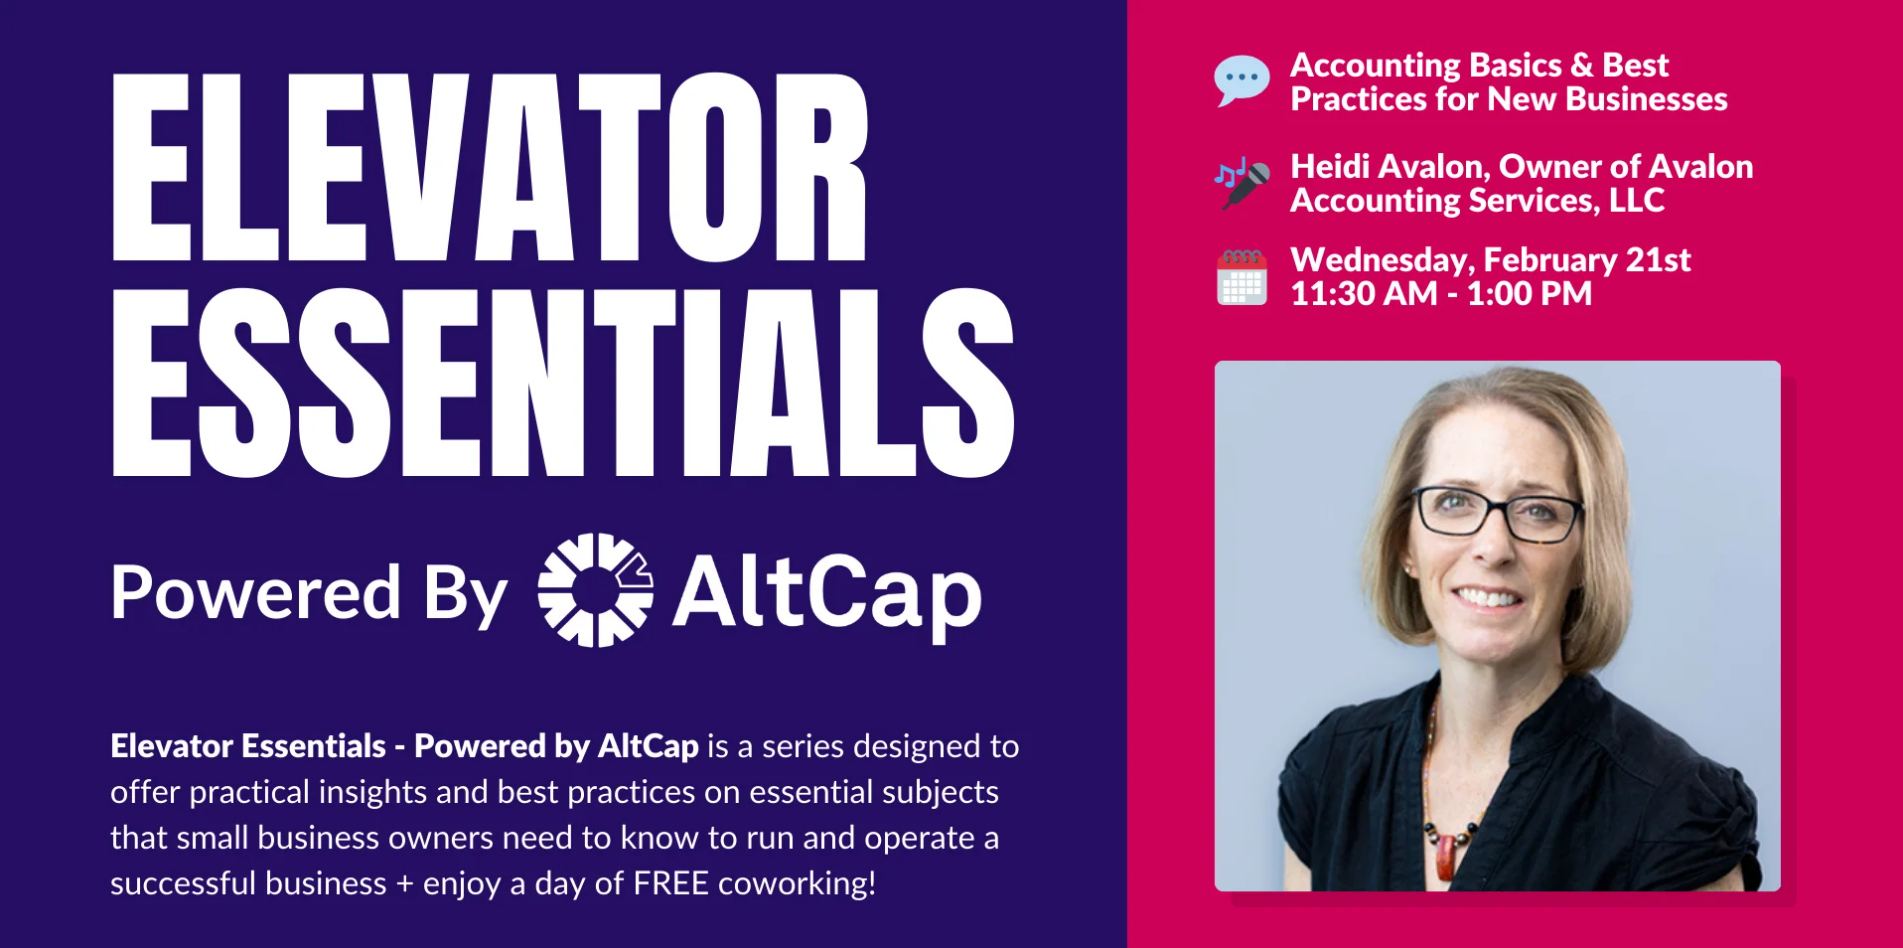 Elevator Essentials - Powered by AltCap | Accounting Basics & Best Practices for New Businesses